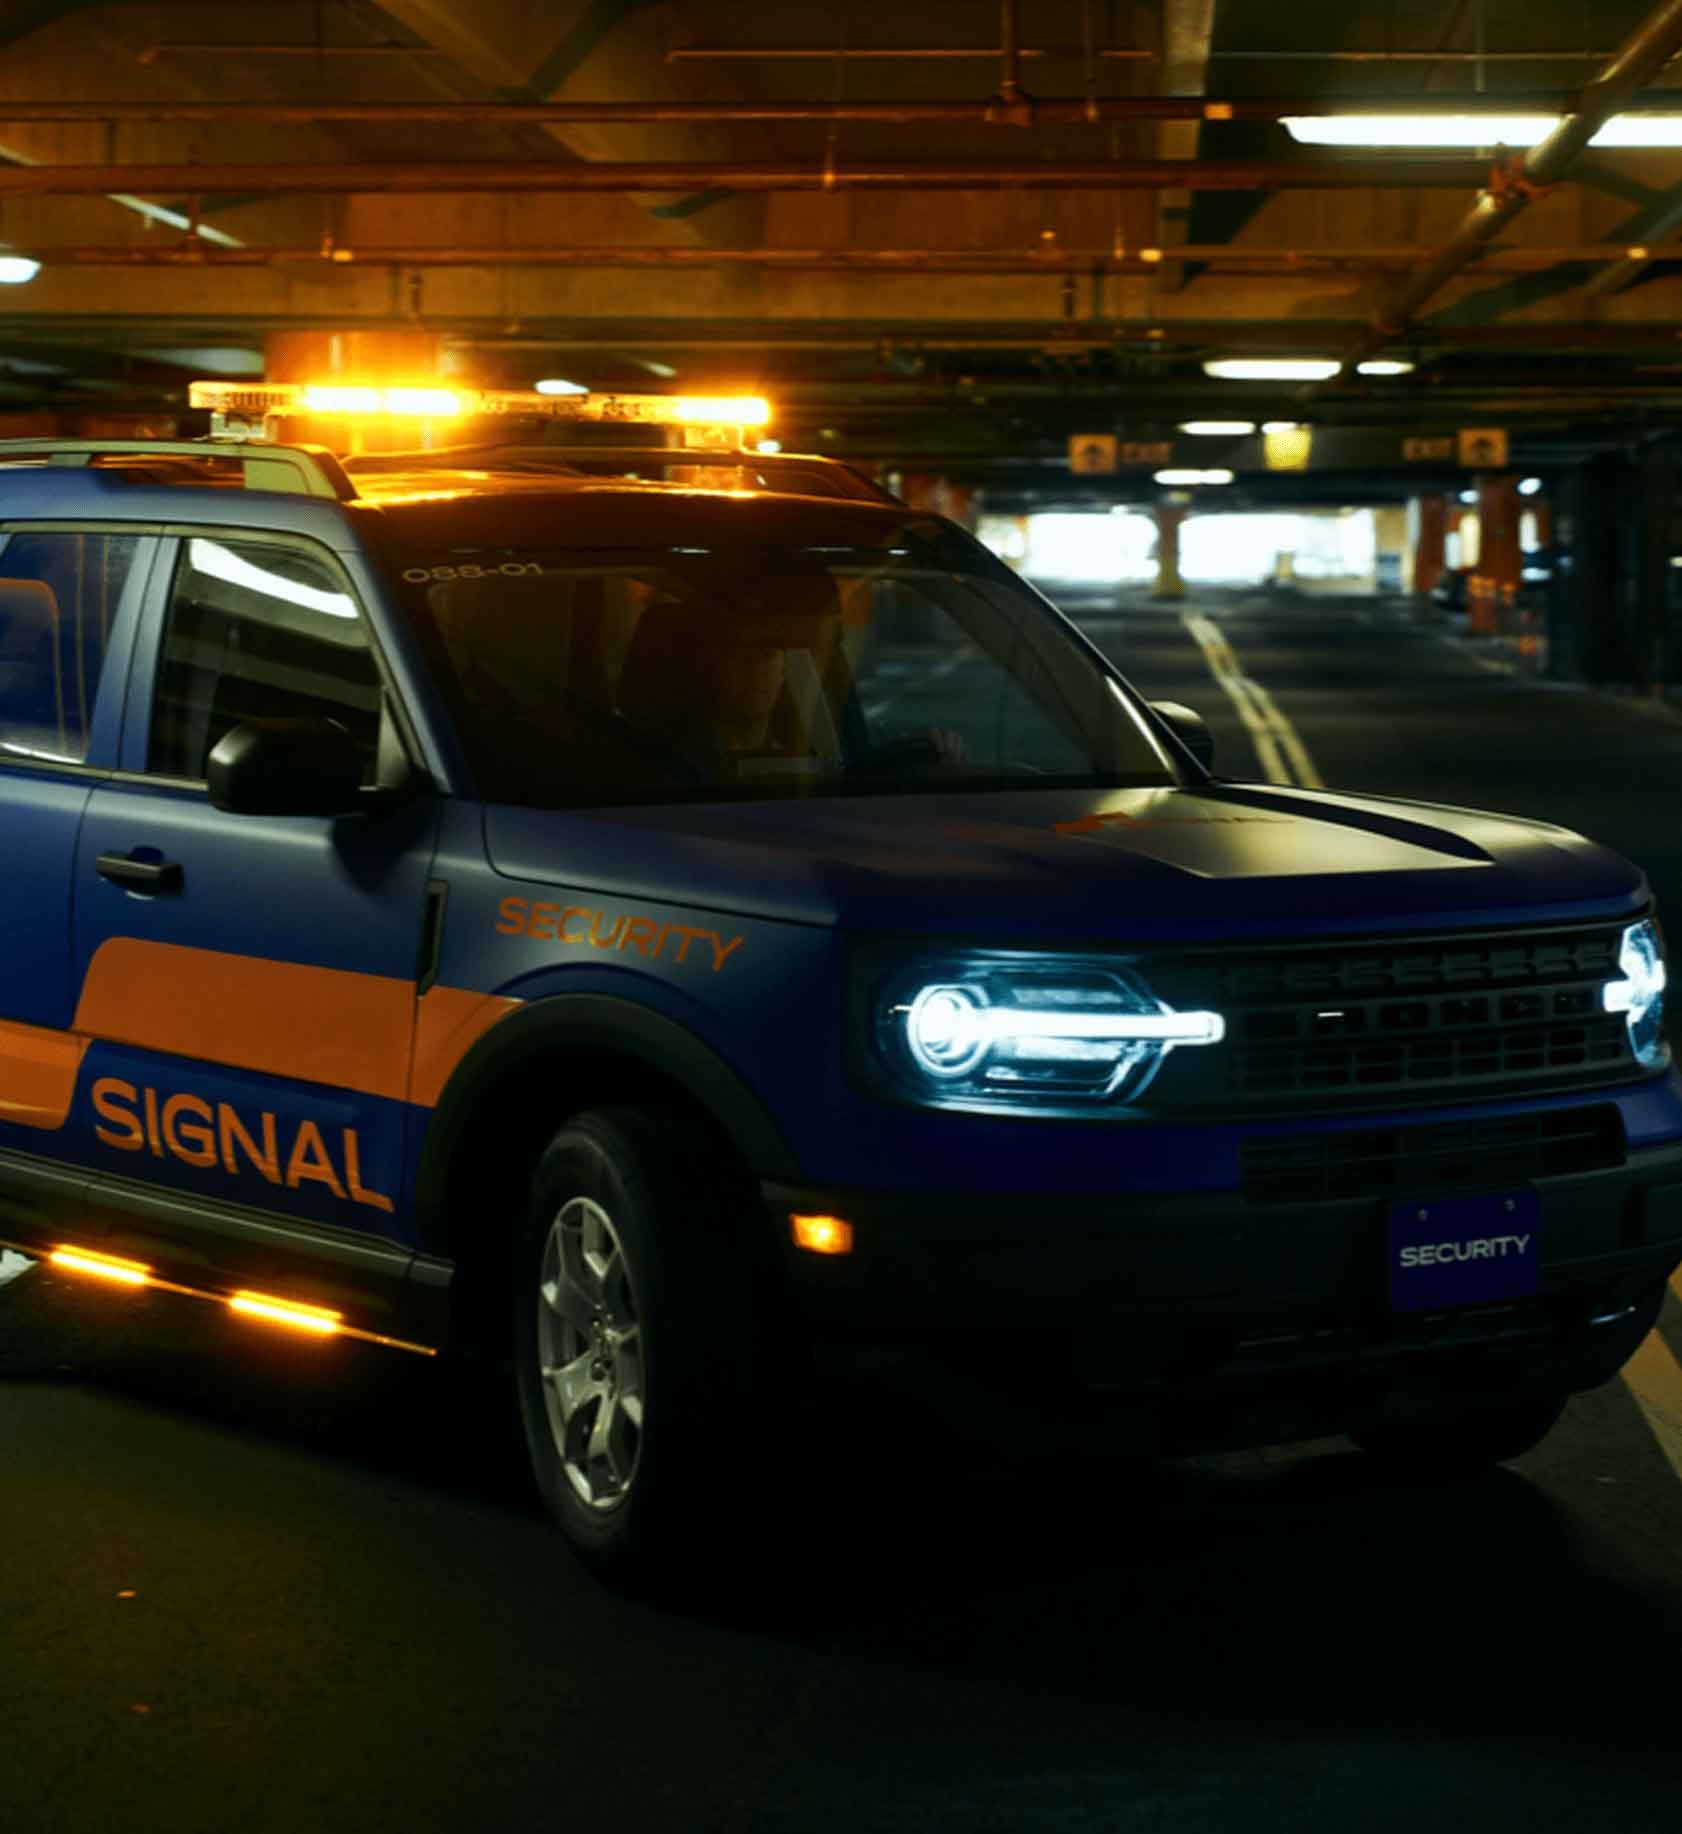 Signal security services company vehicle with its lights on in a dark parking garage